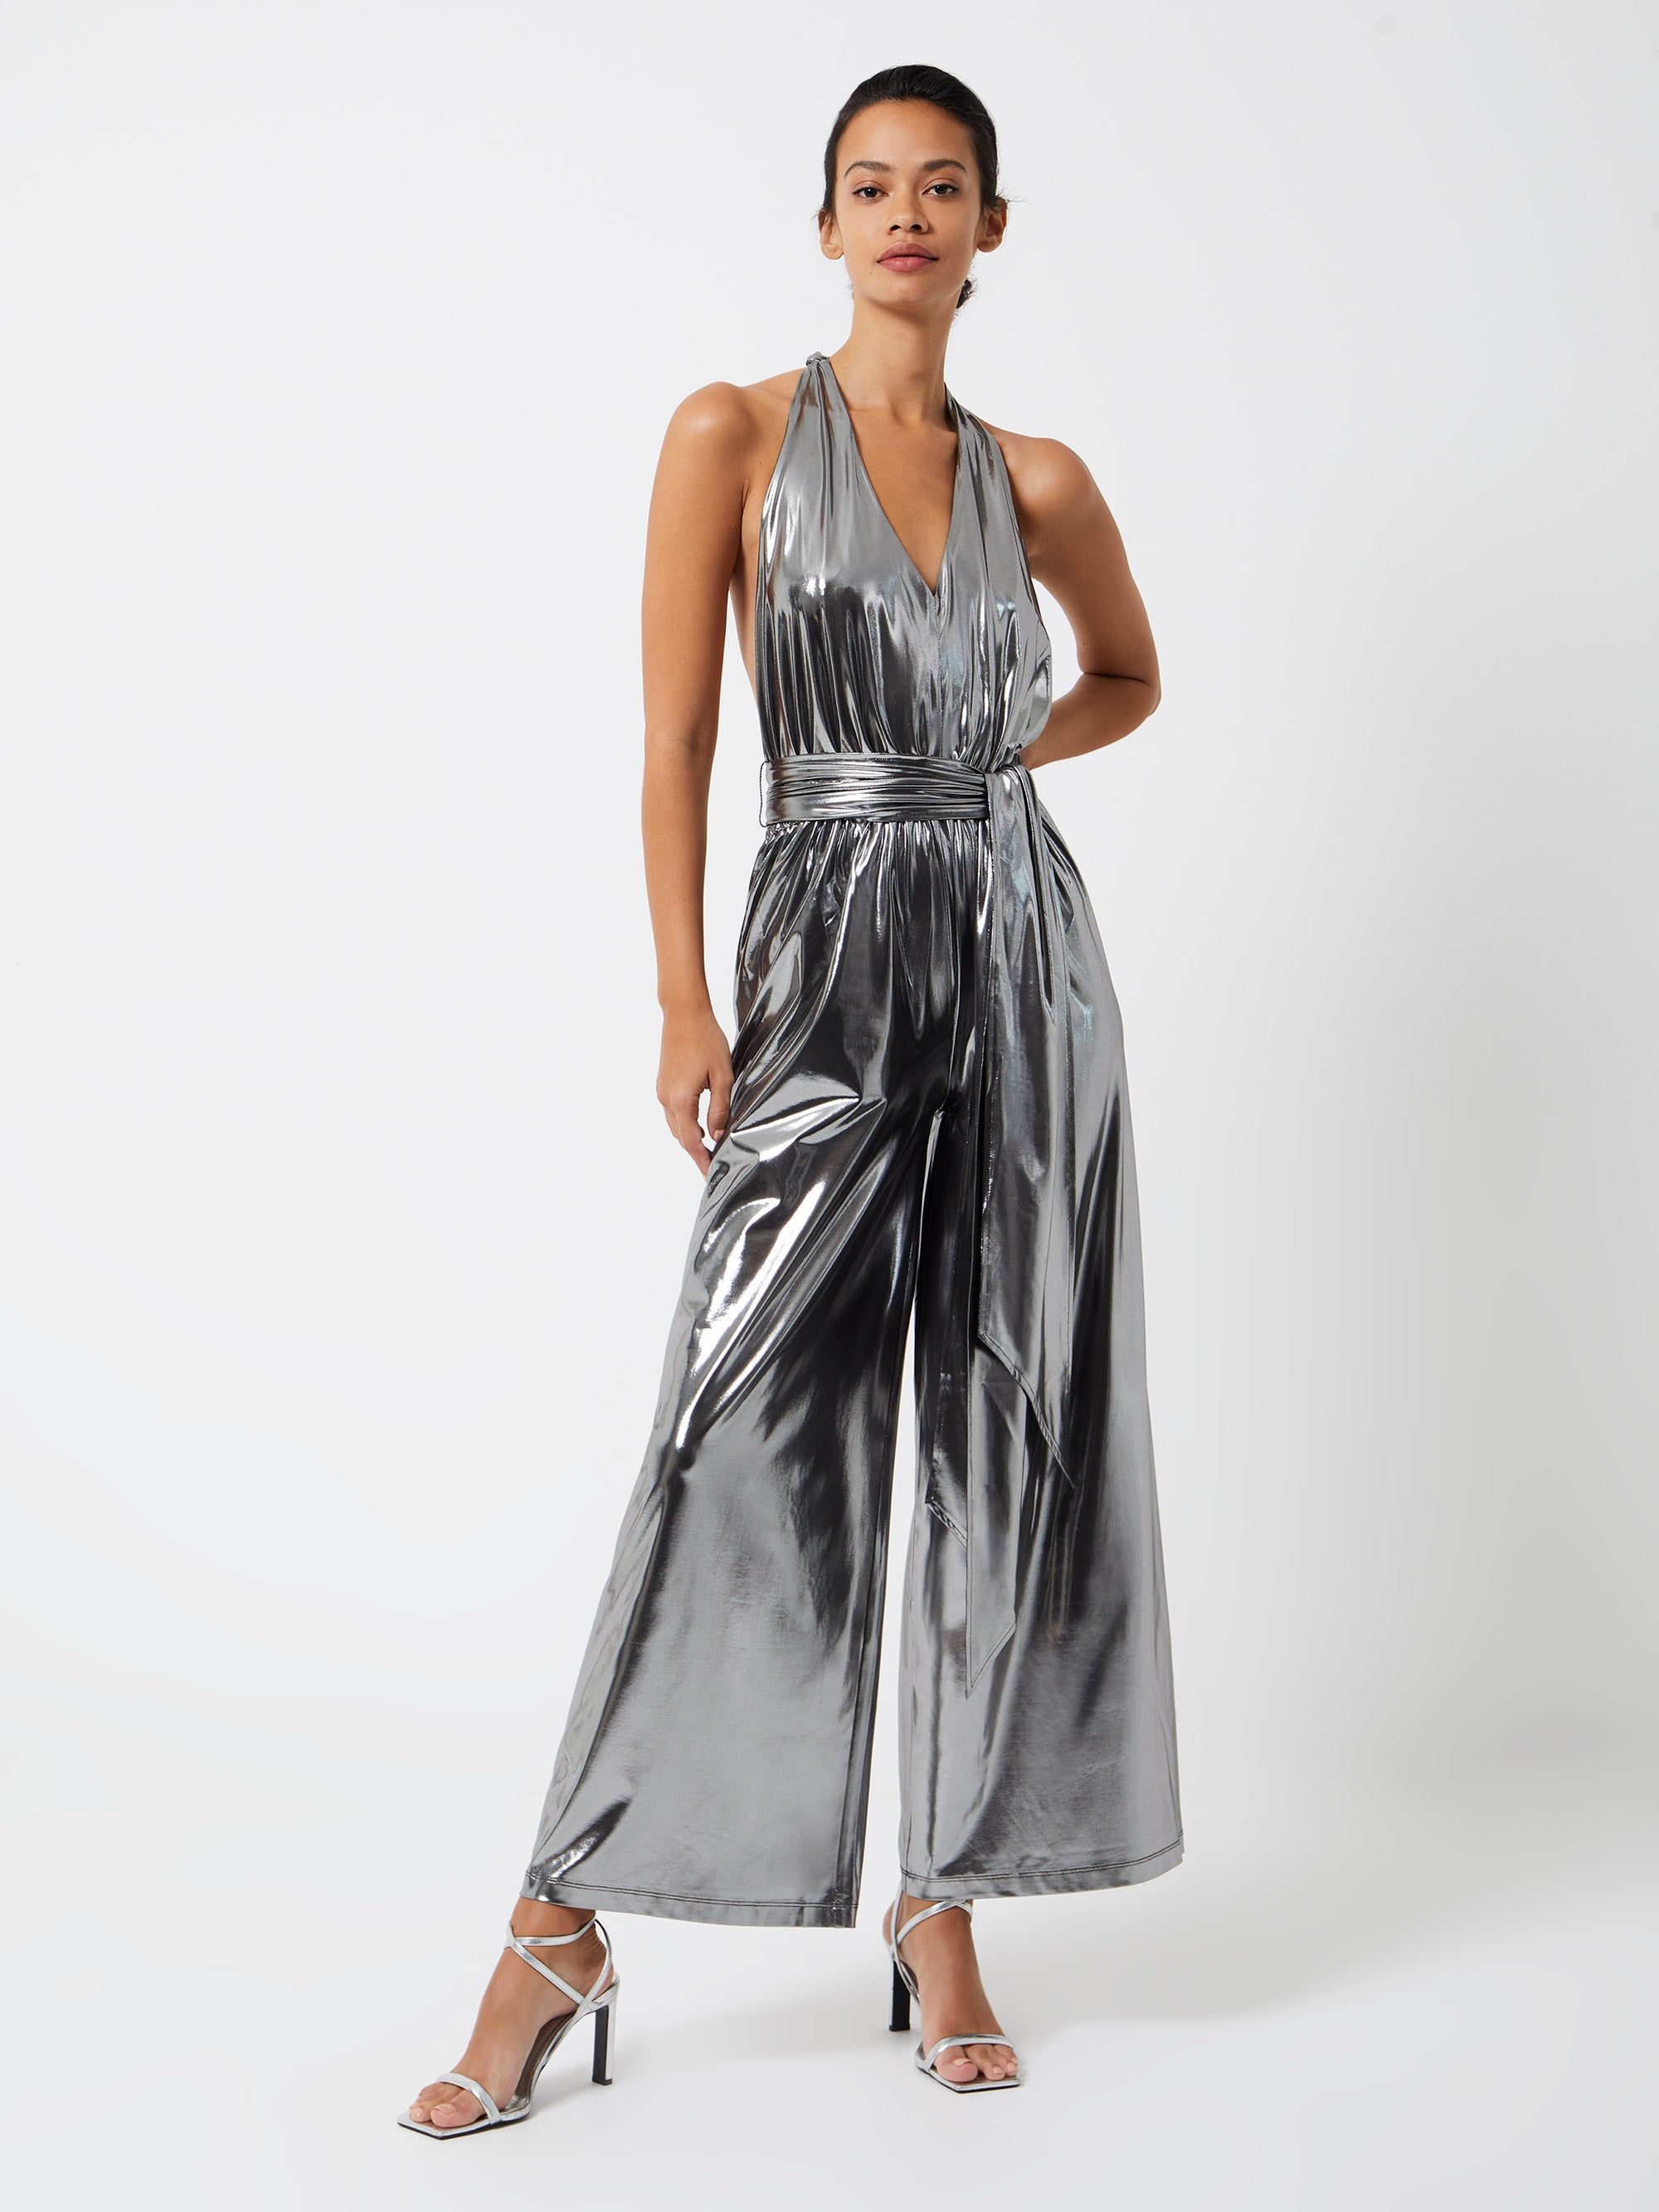 French Connection - Ronja Liquid Metallic Jersey Backless Jumpsuit | French Connection |  Jumpsuits & Playsuits | Extra Small - Silver - Size: XS